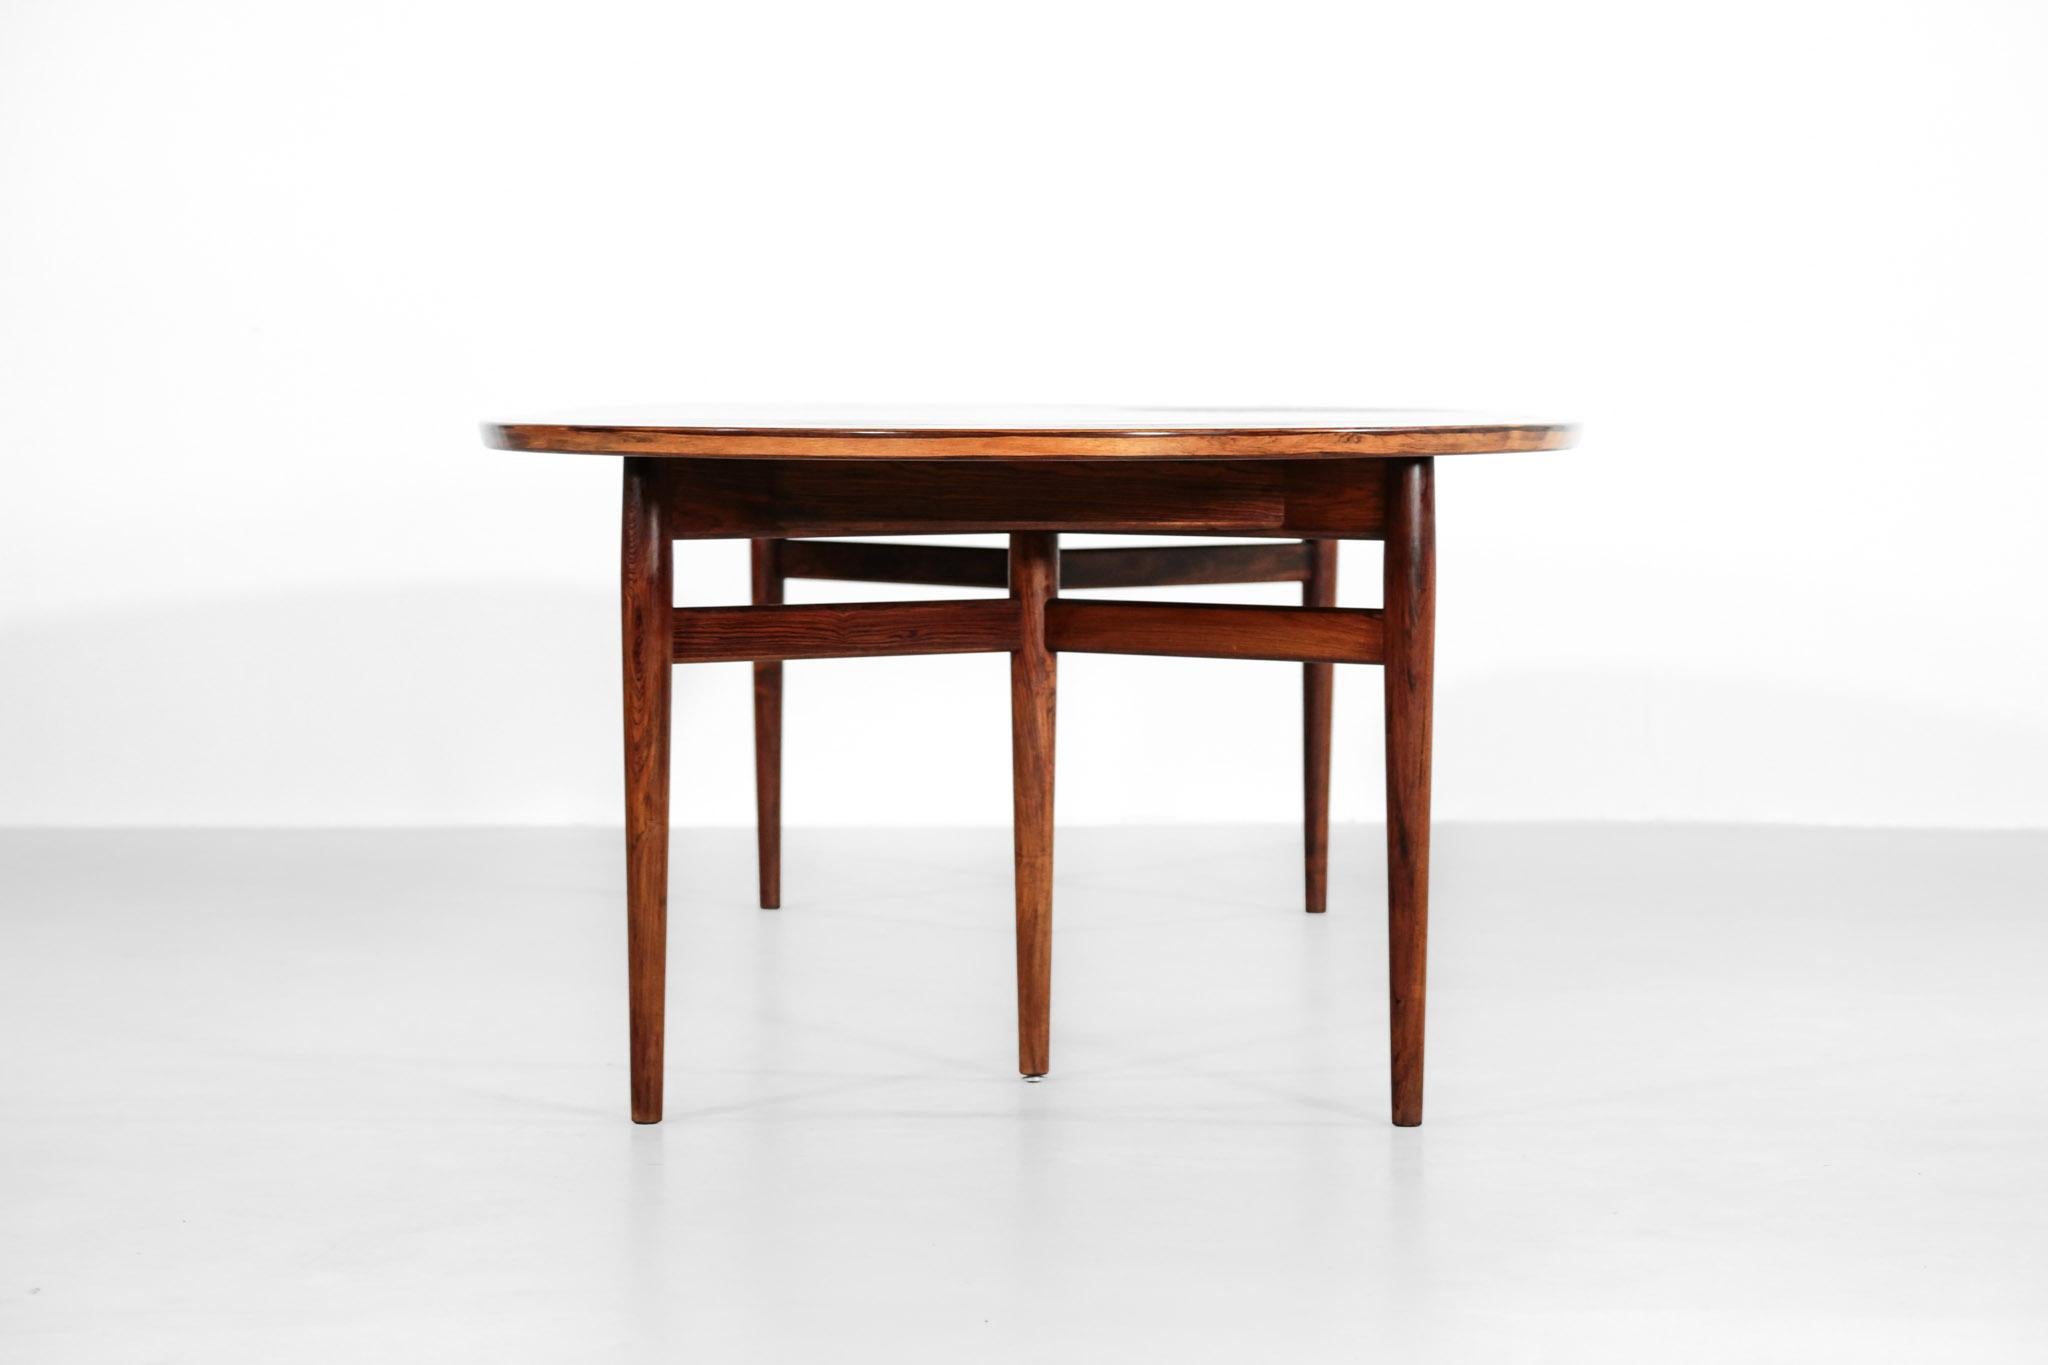 Rare Scandinavian dining table designed by Arne Vodder for Sibast.
Massive rosewood leg with exceptional wood grain. 
Two extensions (50 cm each), wide from 2 m to 3 m.